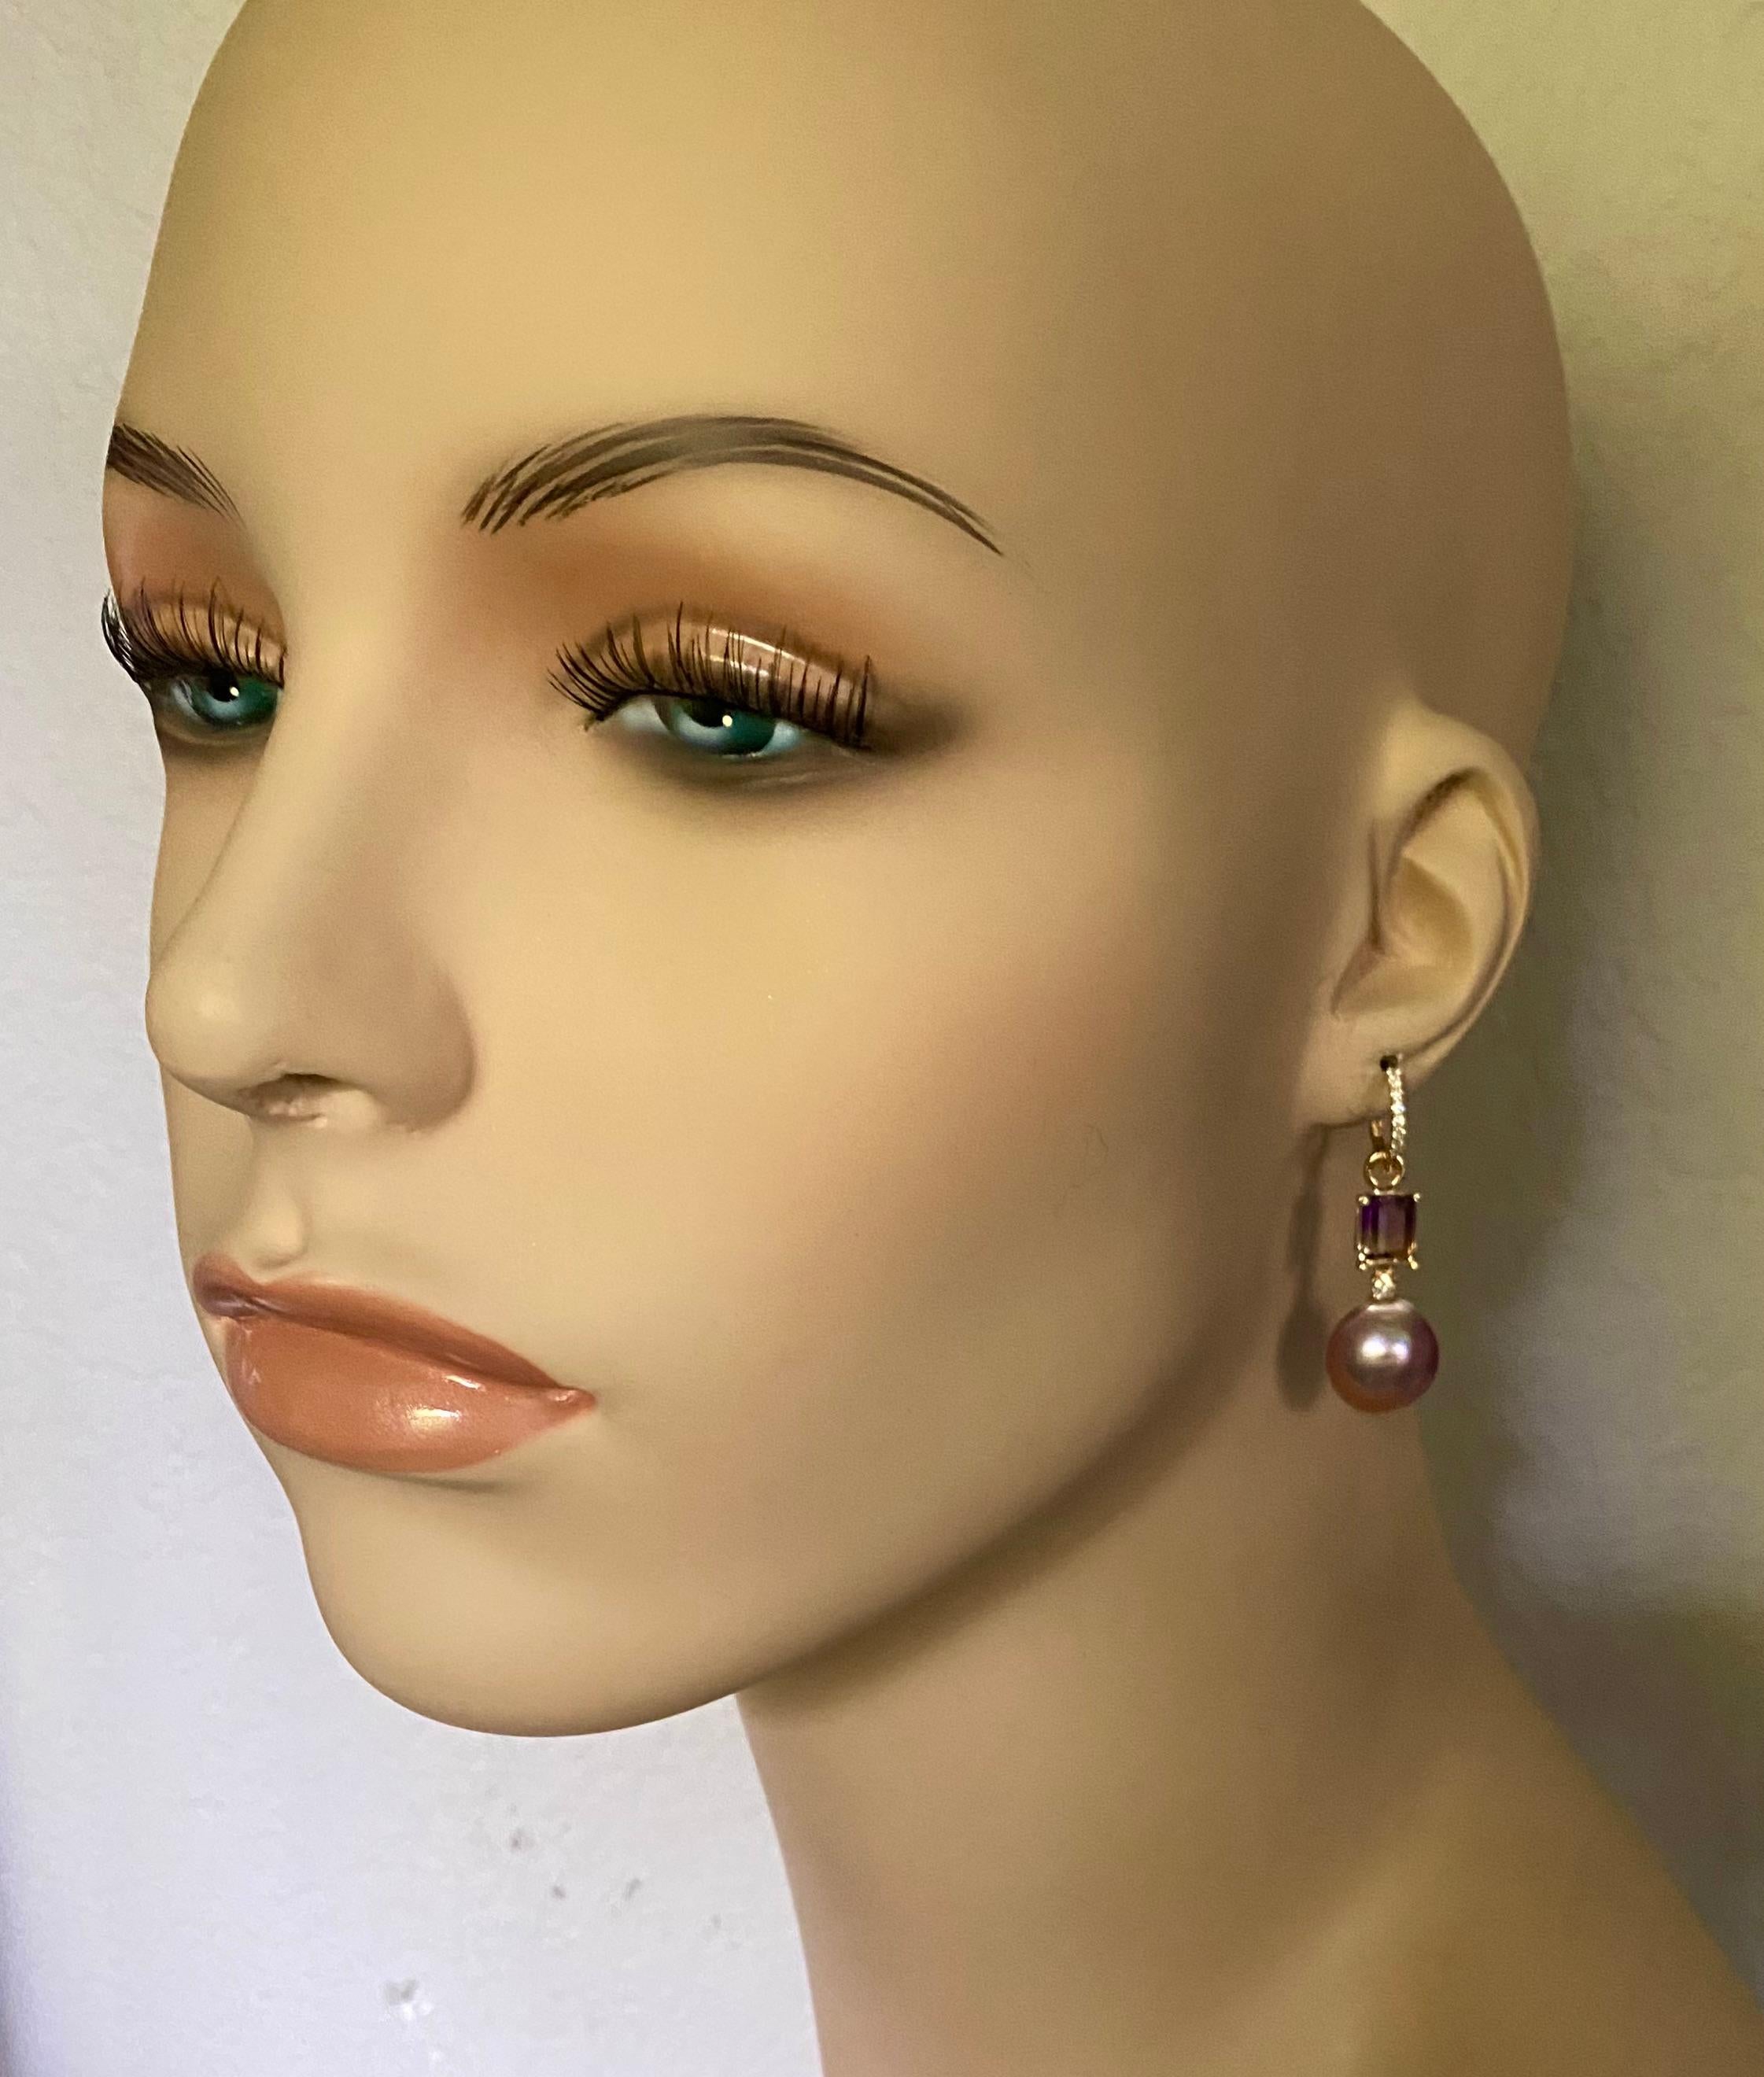 Kasumi pearls are featured in these elegant and versatile dangle earrings.  Kasumi pearls come from Japan.  Their proper name is Kasumiga.  They are typically baroque in shape, have a strong iridescence and possess multiple colors from purple, gold